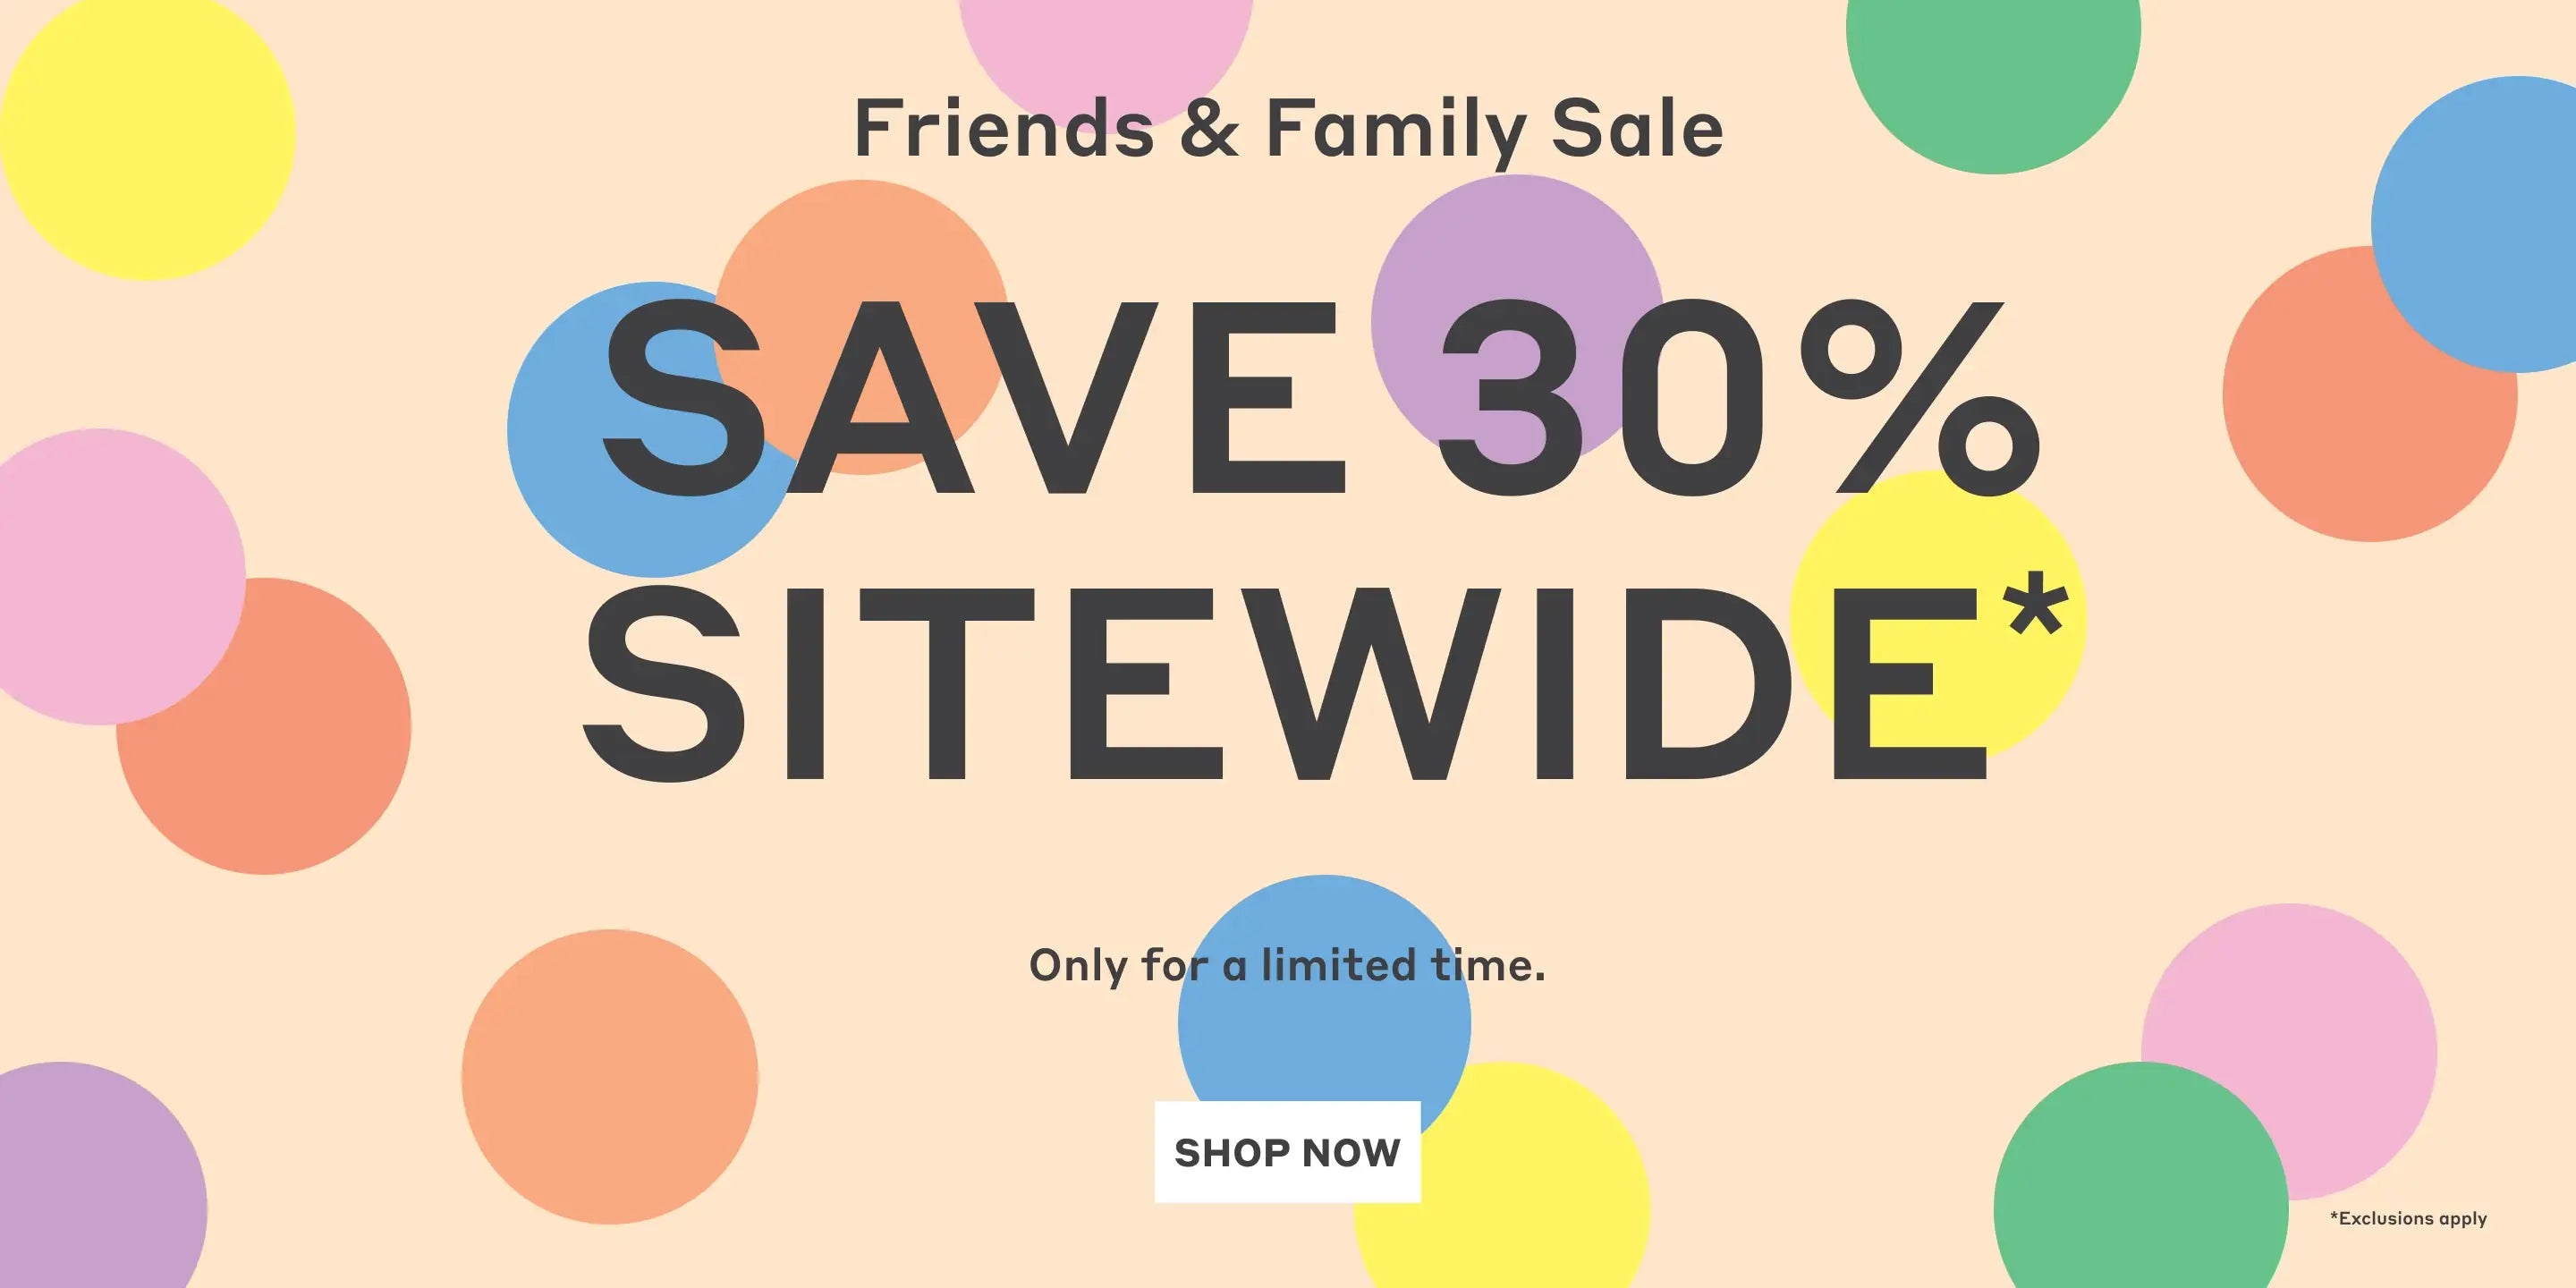 Hero banner with confetti graphic in multiple colors with text: Friends & Family Sale. Save 30% Sitewide. Only for a limited time. - Shop Now